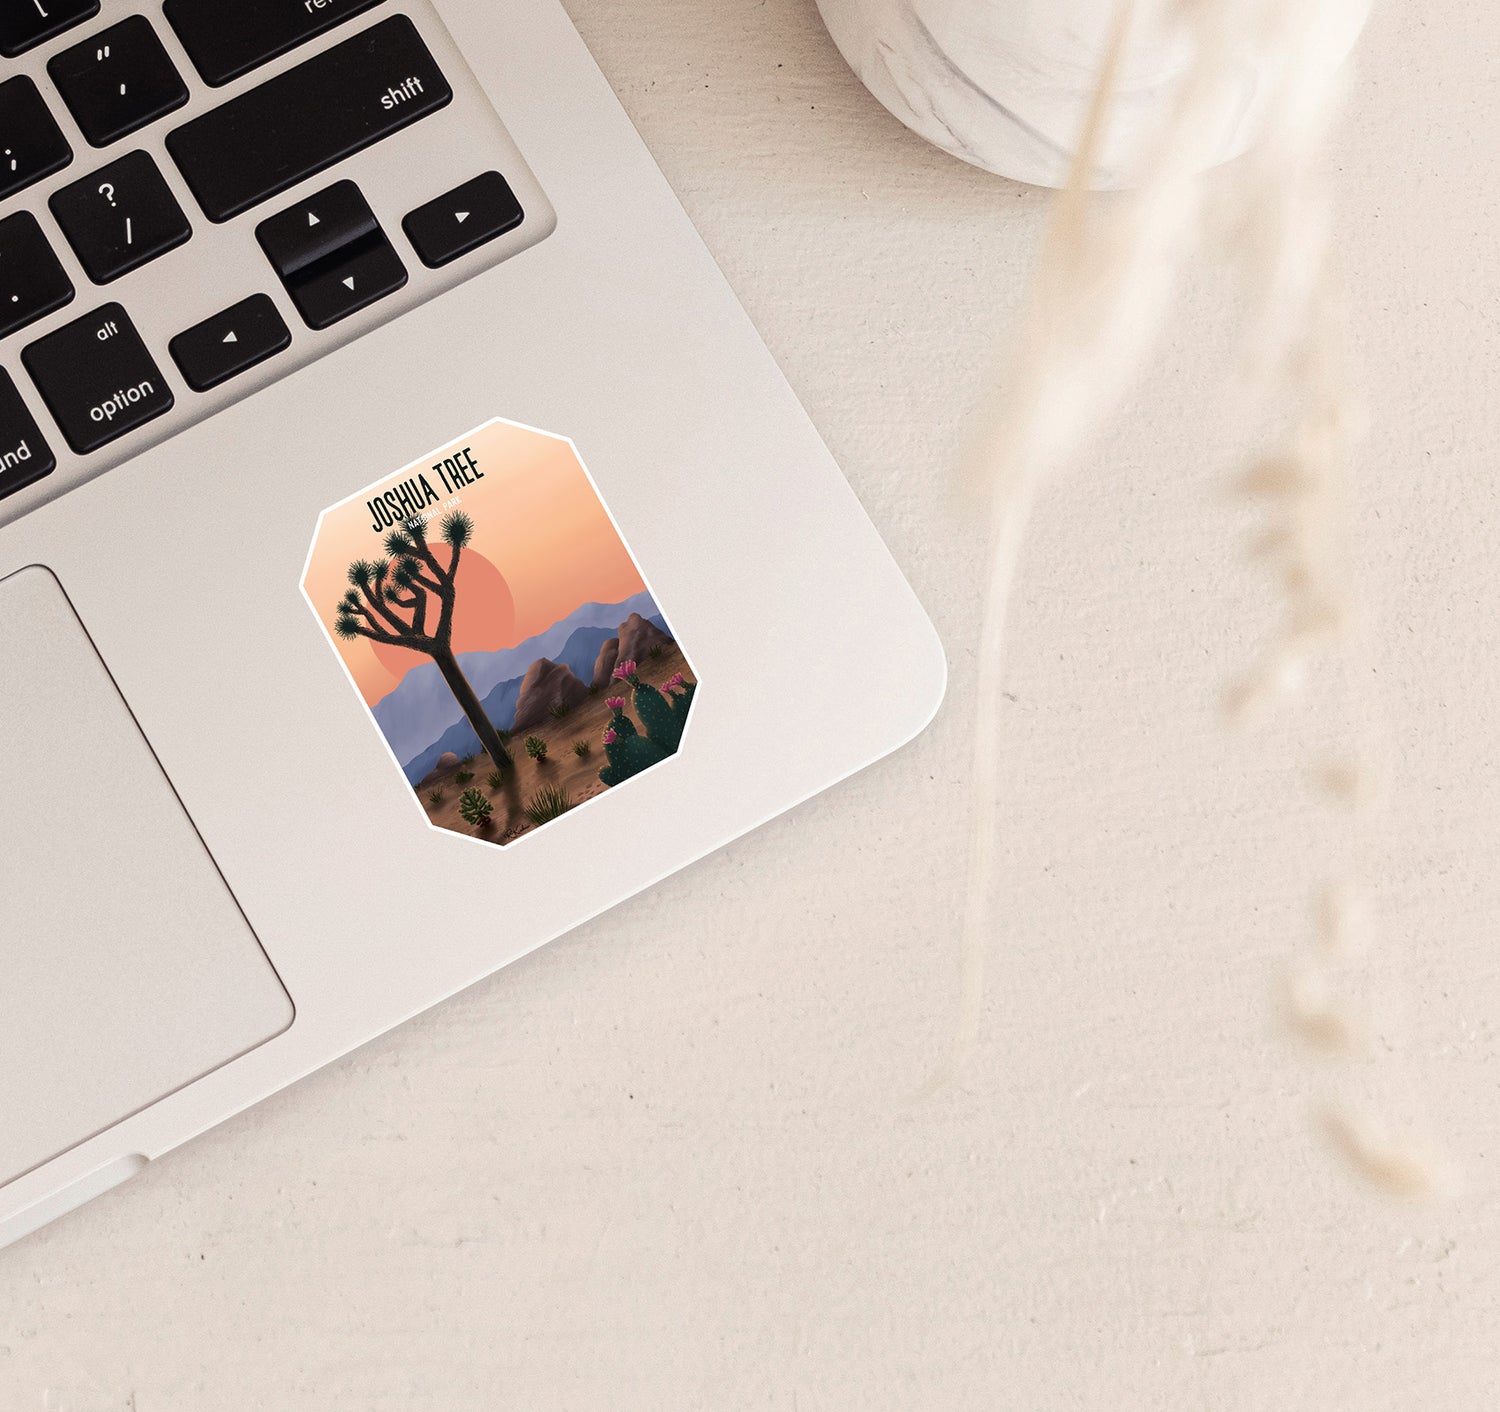 Joshua Tree National Park laptop sticker with yucca tree, cactus, and mountains